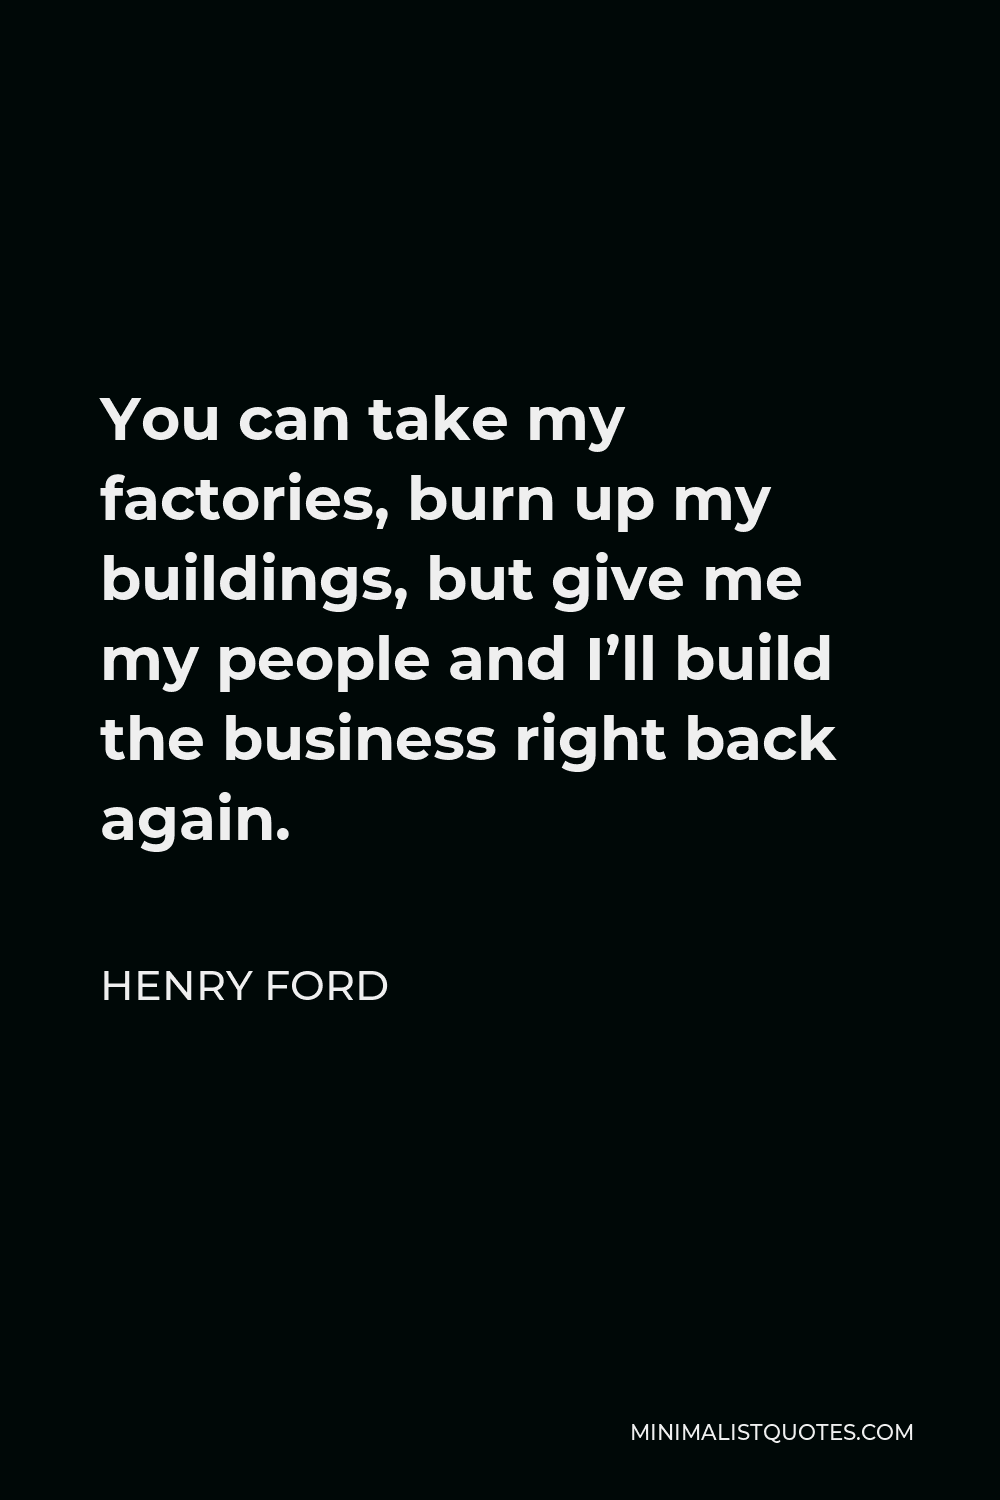 Henry Ford Quote - You can take my factories, burn up my buildings, but give me my people and I’ll build the business right back again.